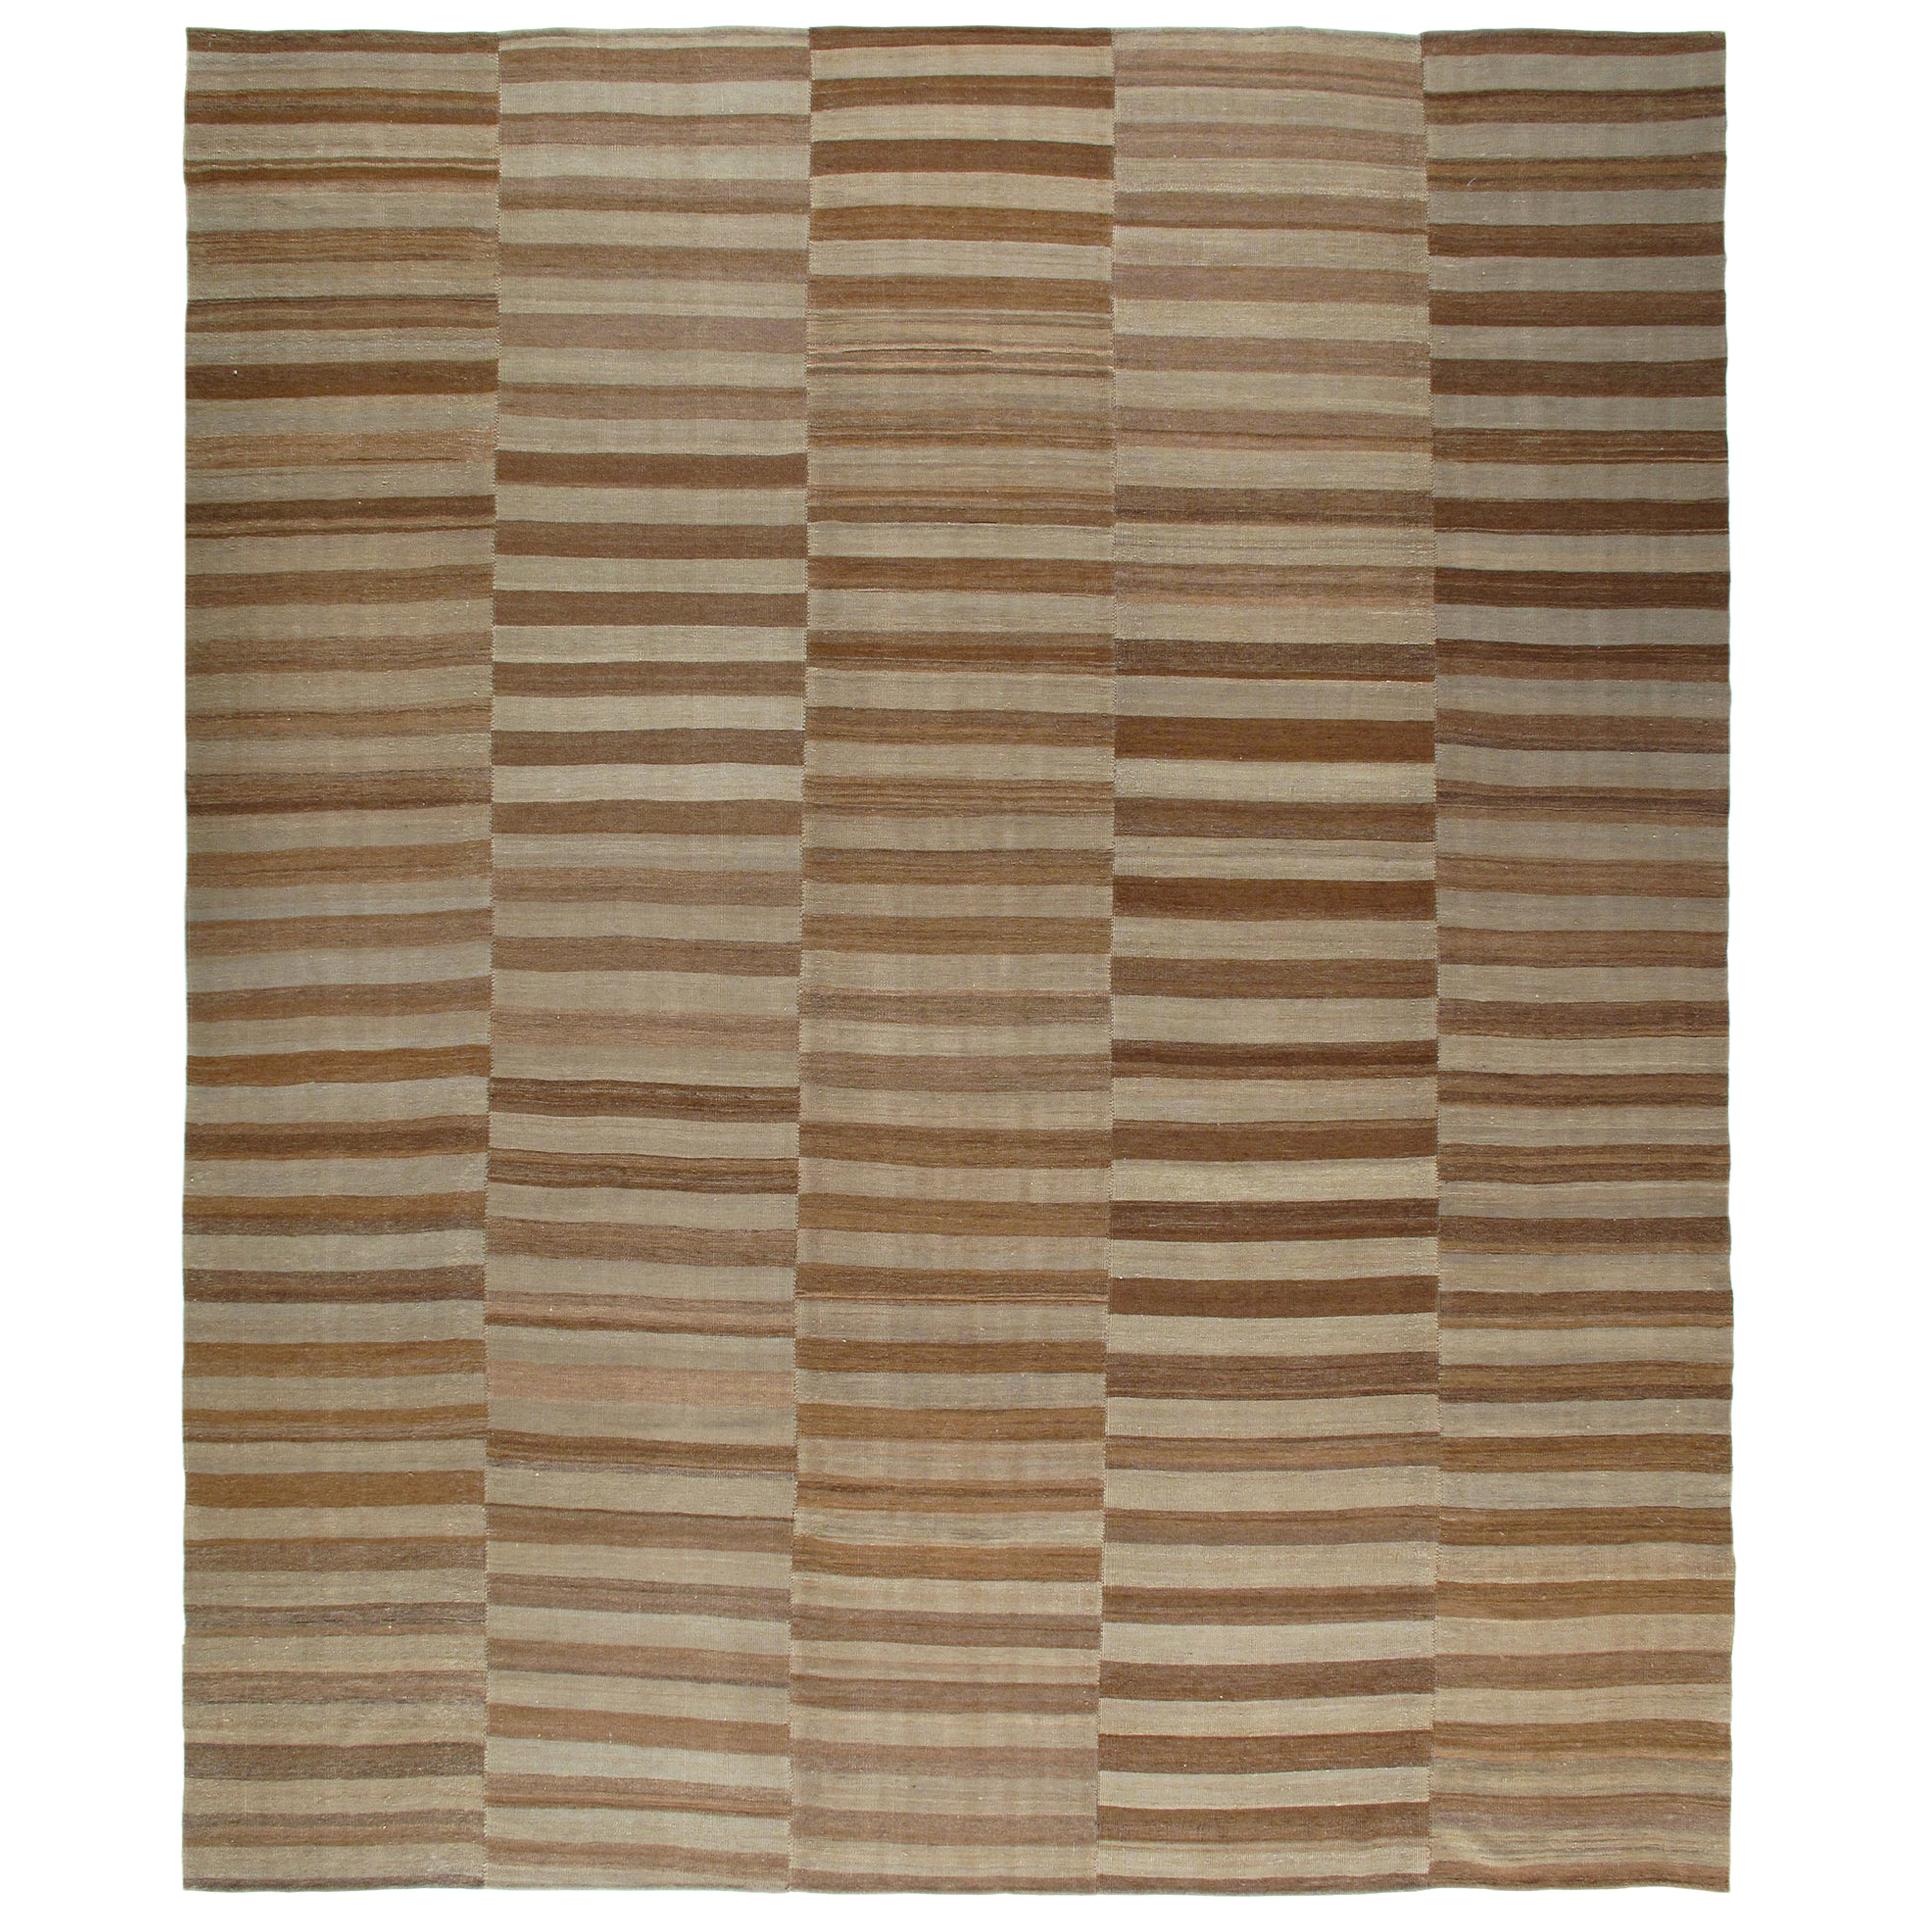 Modern Shiraz Handwoven Flatweave Rug in Brown and Beige Color For Sale